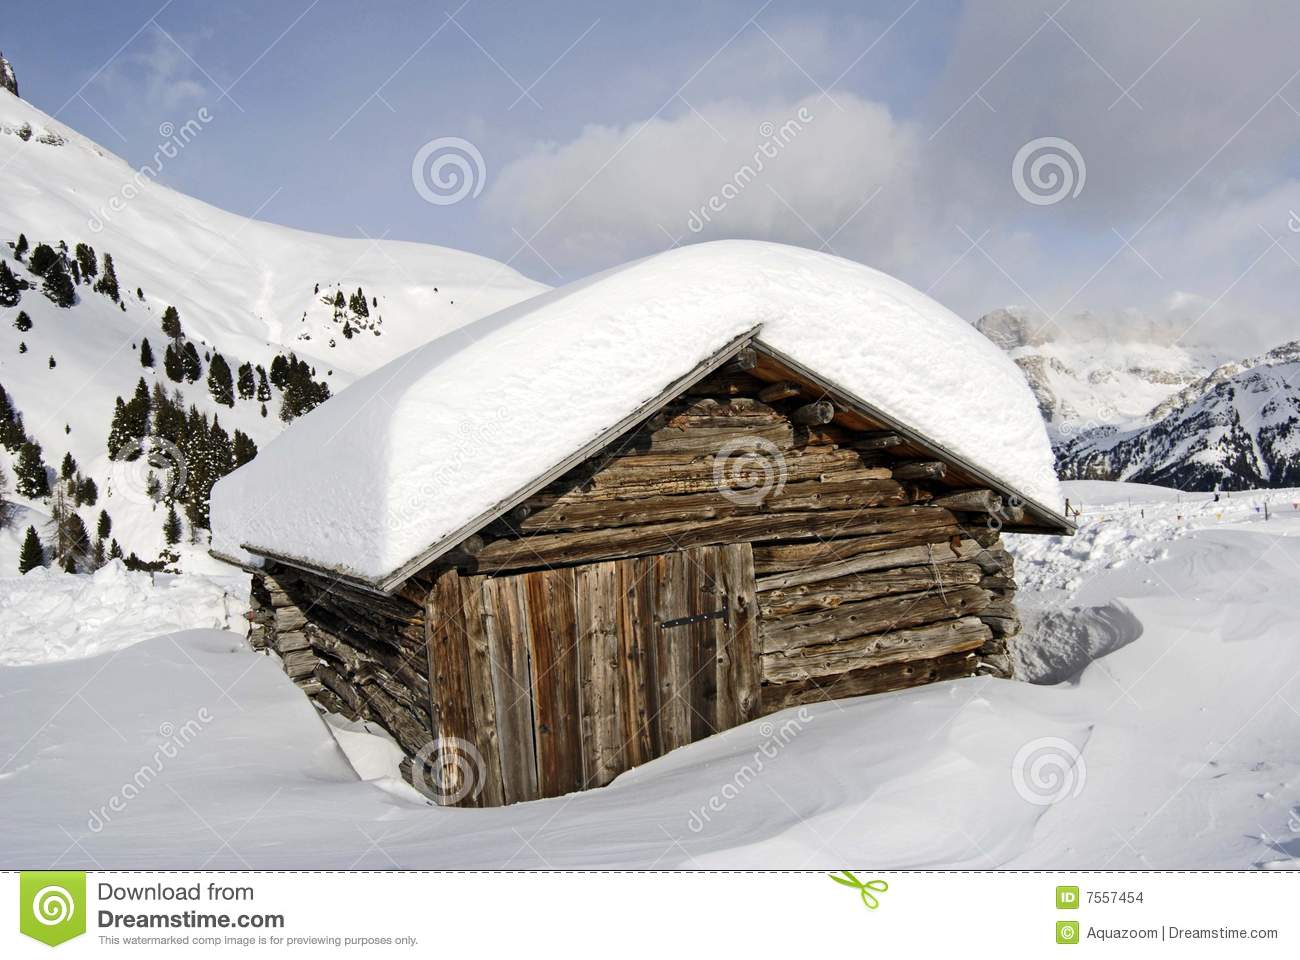 View Of A Small Snow Covered Cabin Or Log Building High In The